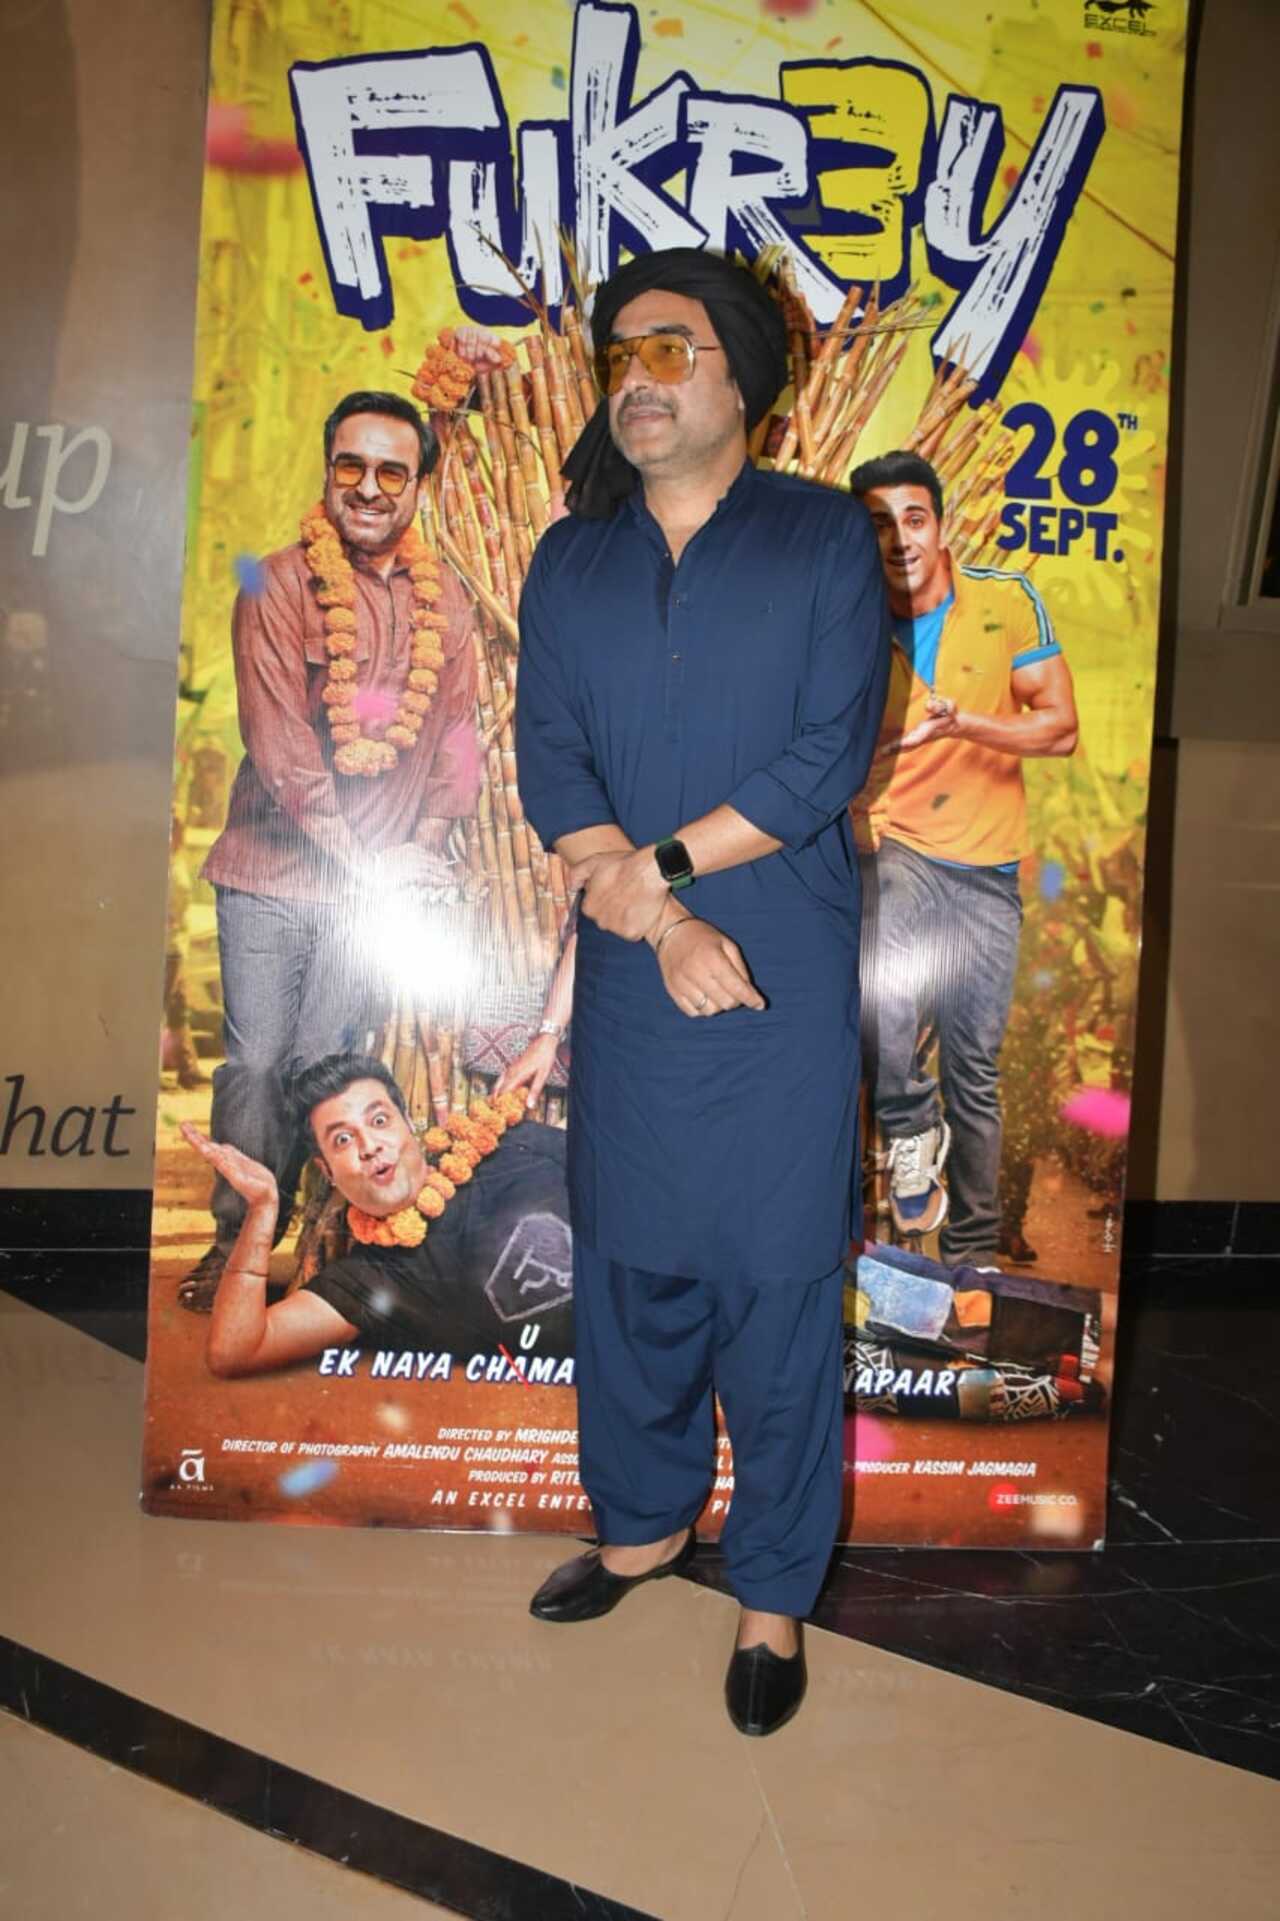 Pankaj Tripathi aced the desi look for the screening of his film. He has been playing the role of Pundit in all three movies in the franchise